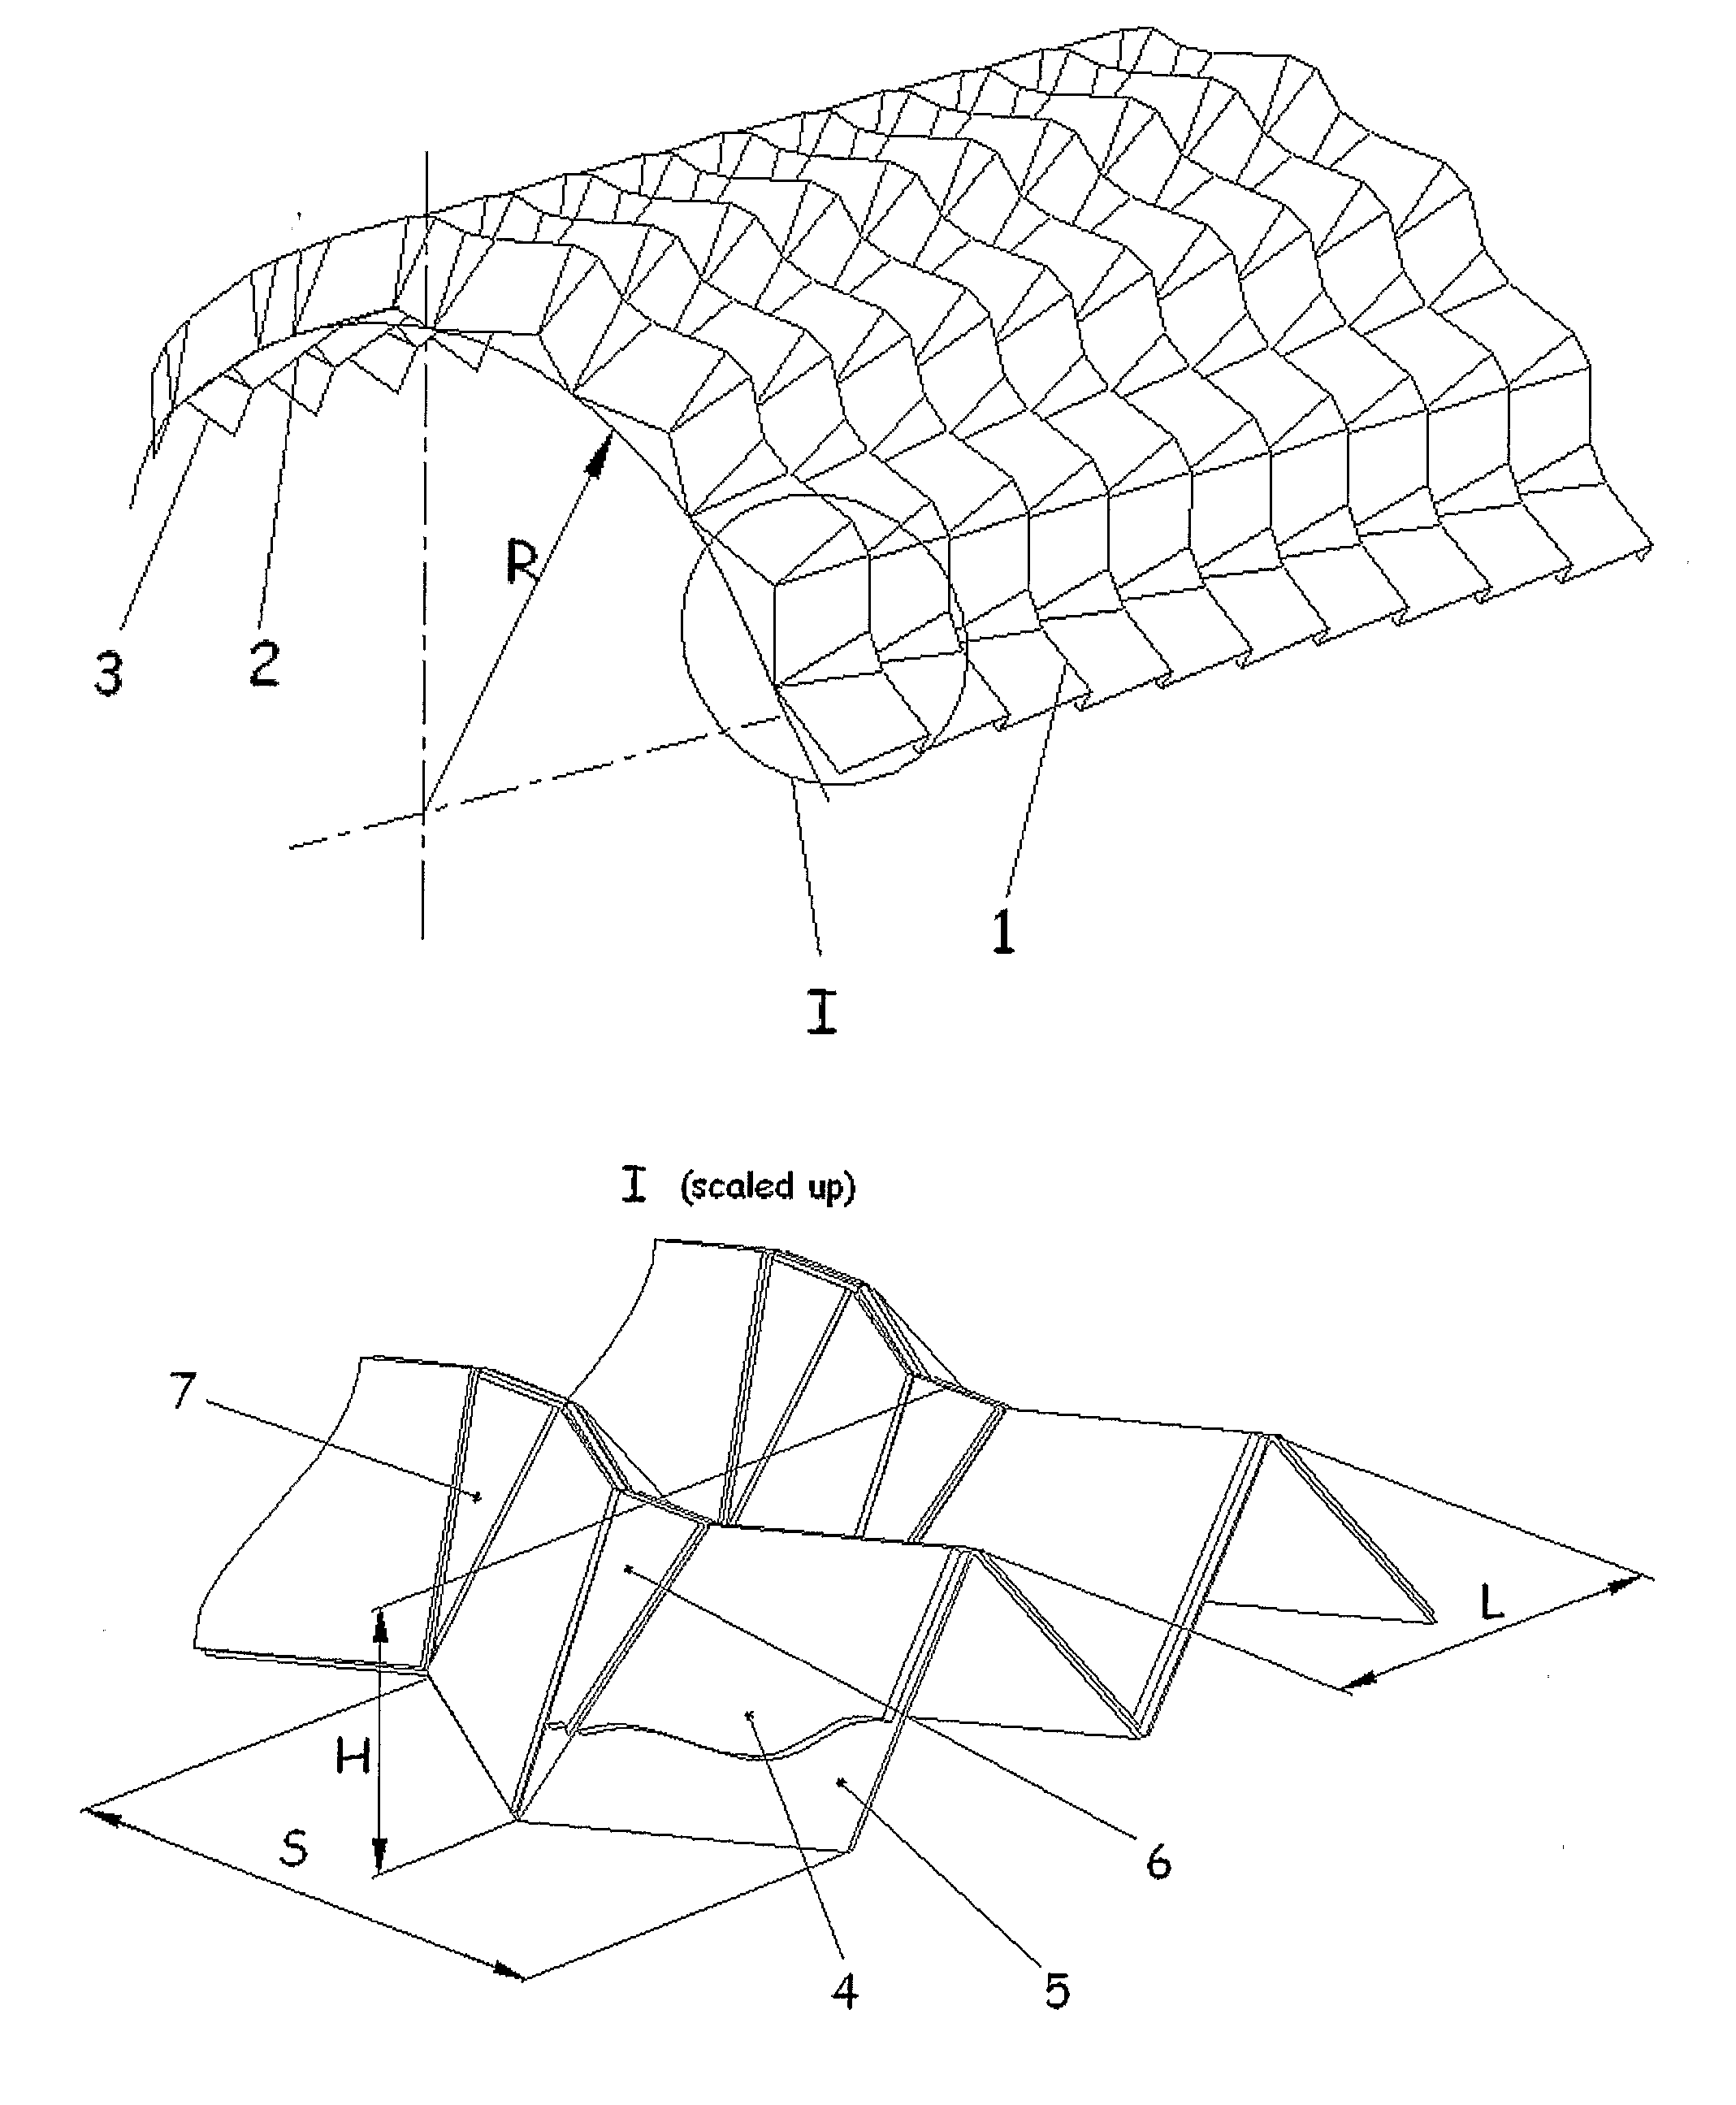 Foldable mandrel for production of a single curvature folded core for a sandwich panel